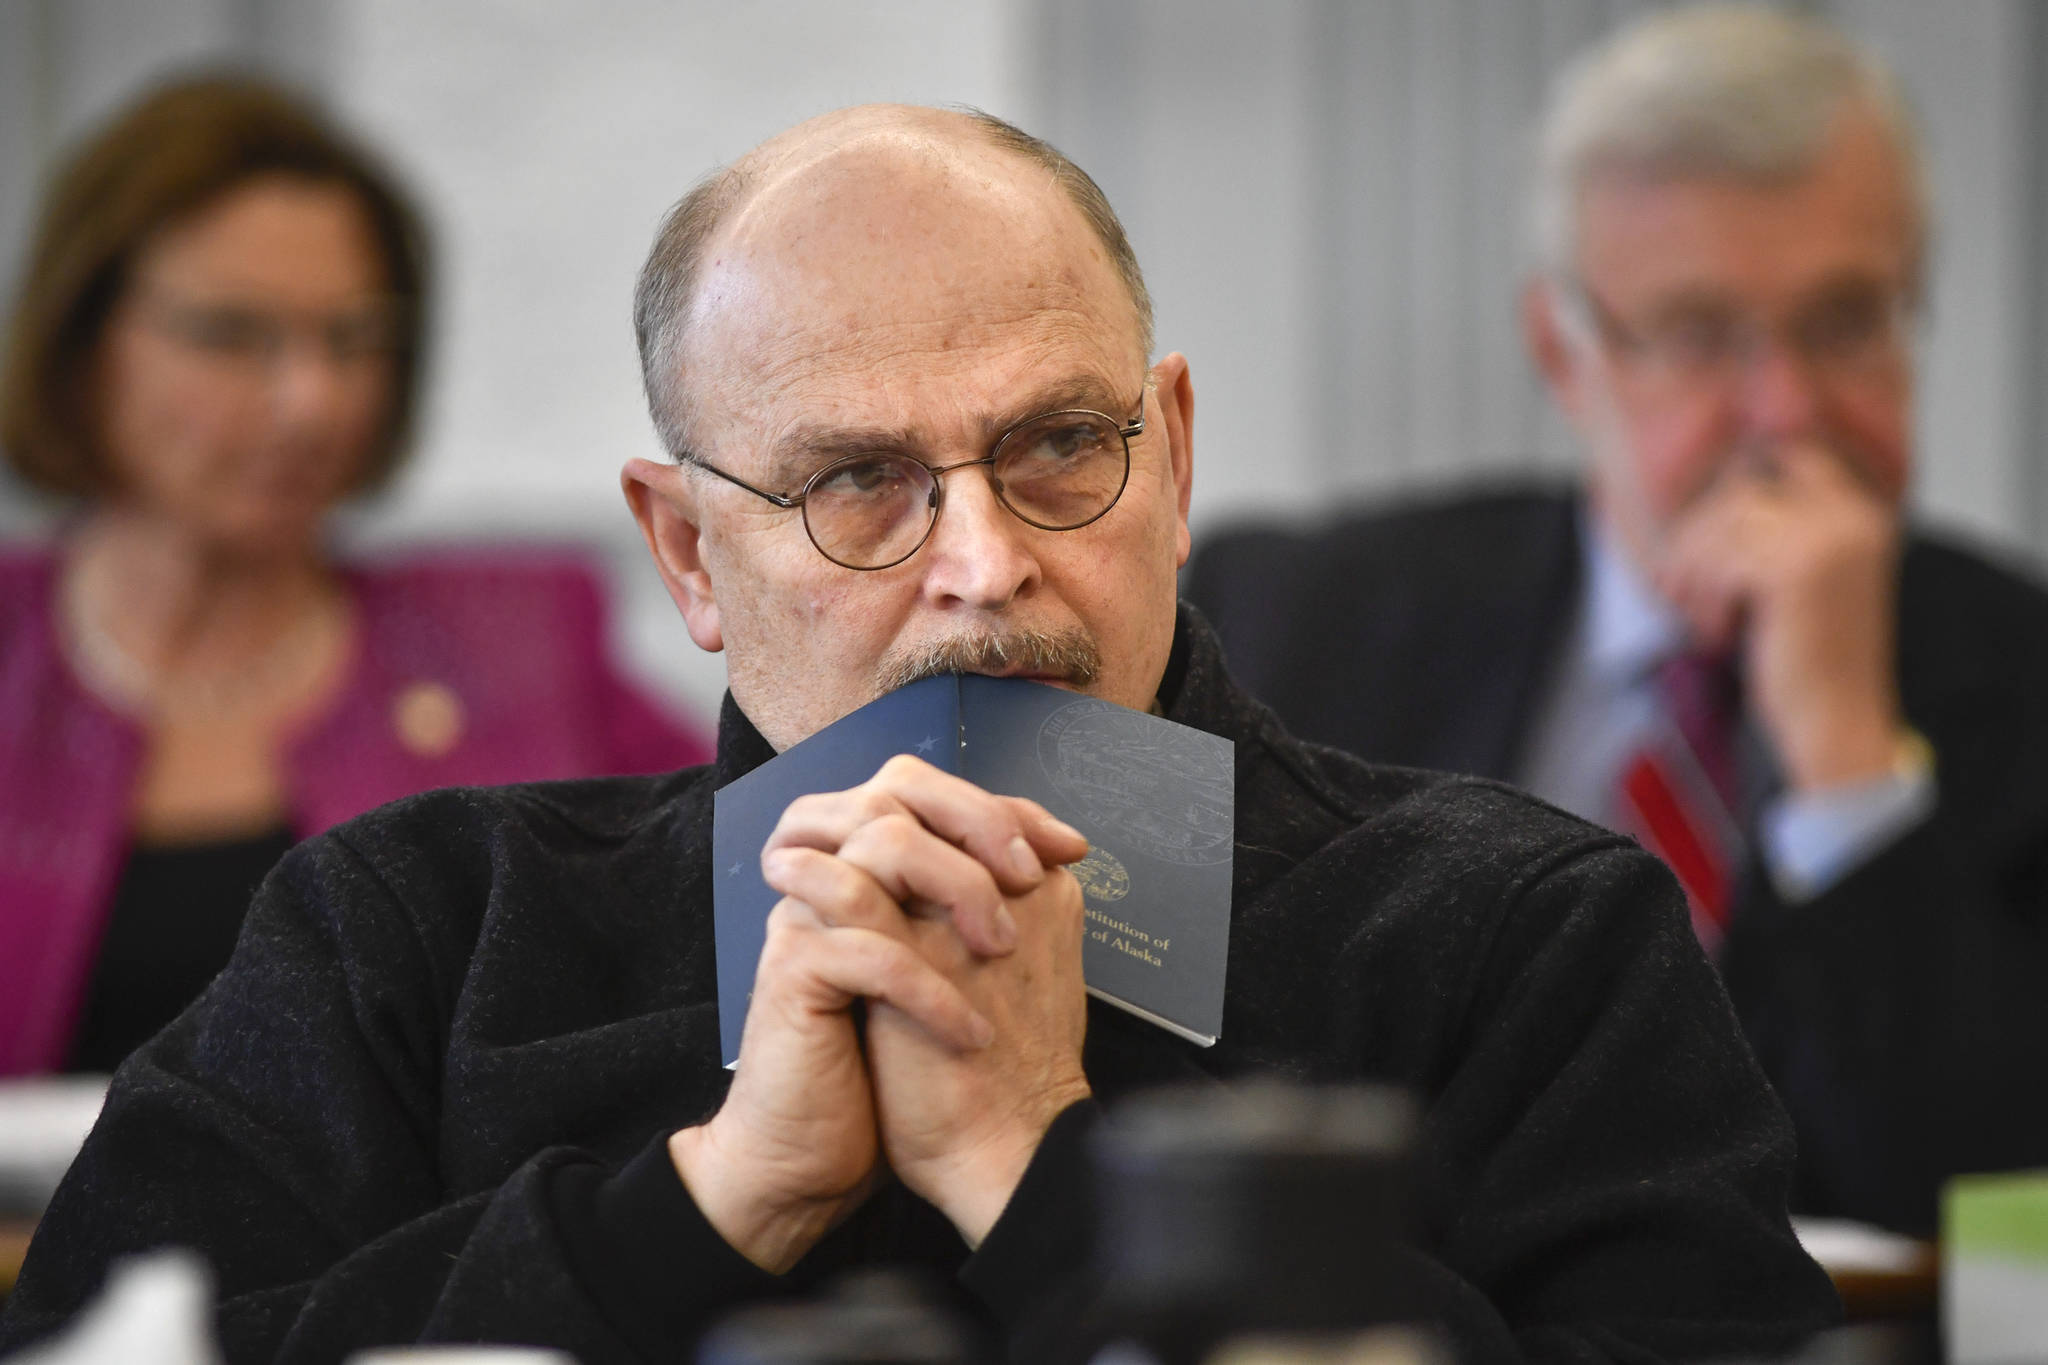 Sen. Click Bishop, R-Fairbanks, rests his head on a Constitution of Alaska booklet as he listens to Donna Arduin, Director of the Office of Management and Budget, and Mike Barnhill, policy director for the OMB, present Gov. Mike Dunleavy’s budget to the Senate Finance Committee at the Capitol on Tuesday, Feb. 18, 2019. Senate President Cathy Giessel, R - Anchorage, left, and Sen. Gary Stevens, R-Kodiak, right, are in the background. (Michael Penn | Juneau Empire)